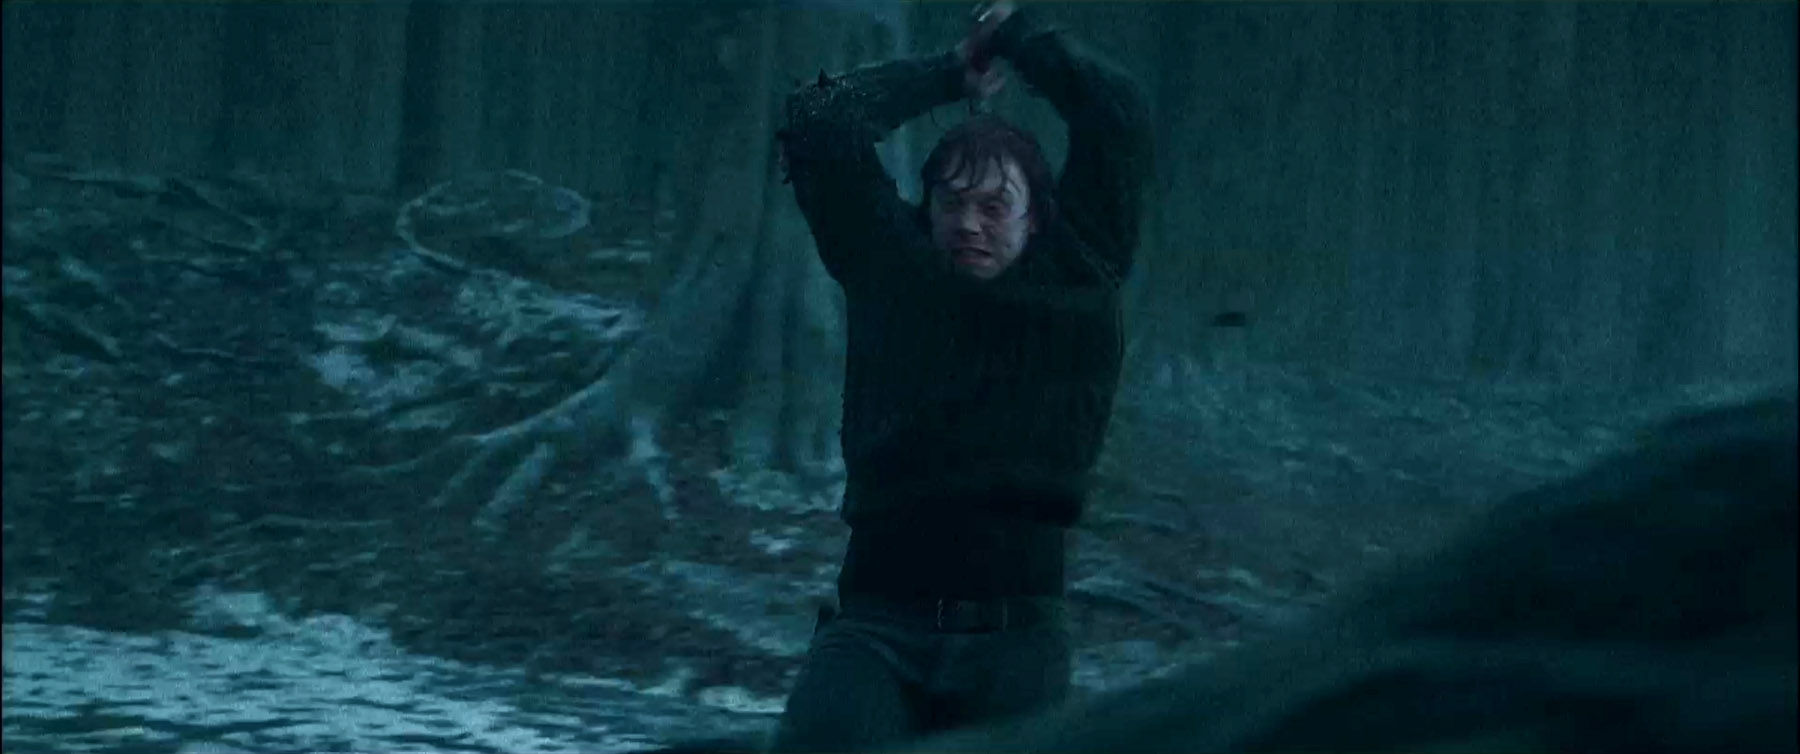  Rupert Grint as Ron Weasley in Warner Bros. Pictures' fantasy adventure "Harry Potter and the Deathly Hallows: Part I".